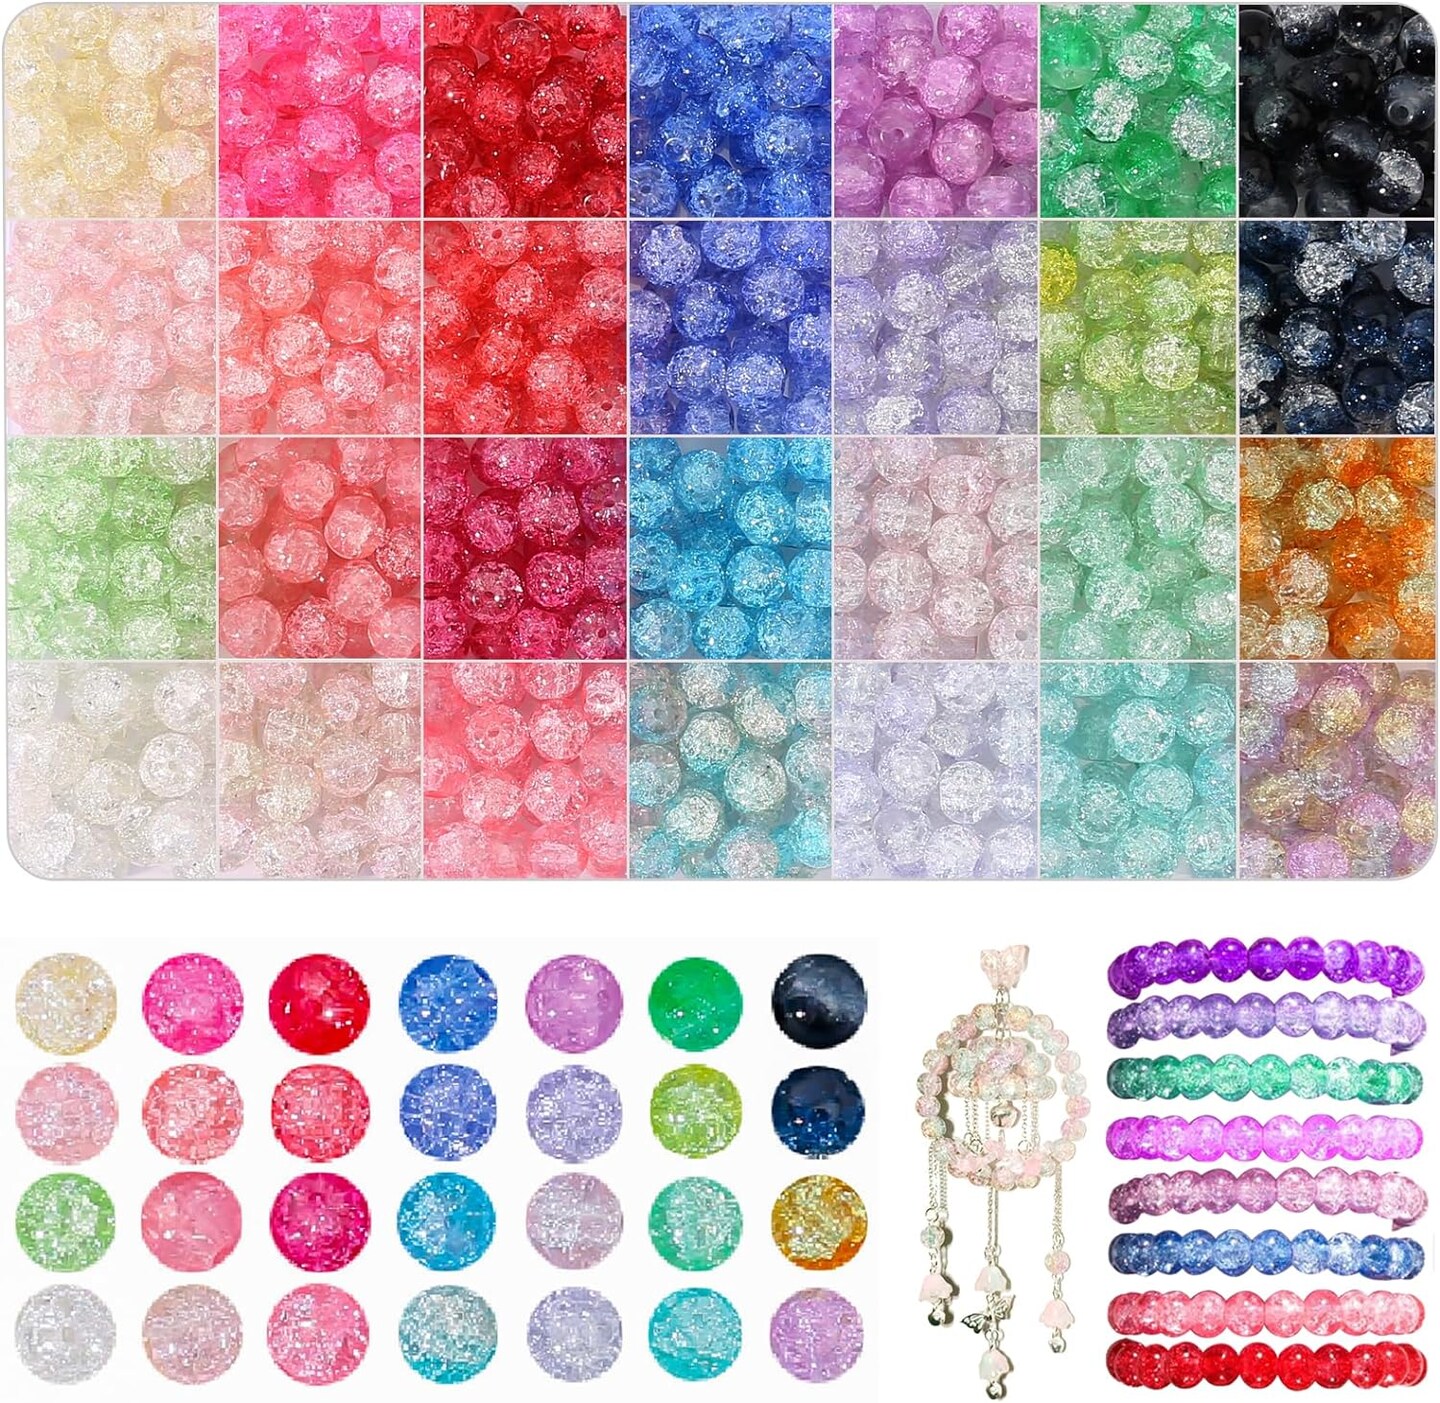 700pcs Crack Glass Beads for Jewelry Making -8MM Beads Bracelet Making Kit with Crystals, Charms, and Friendship Bracelet Beads - Jewelry Making Supplies for Adults and Girls